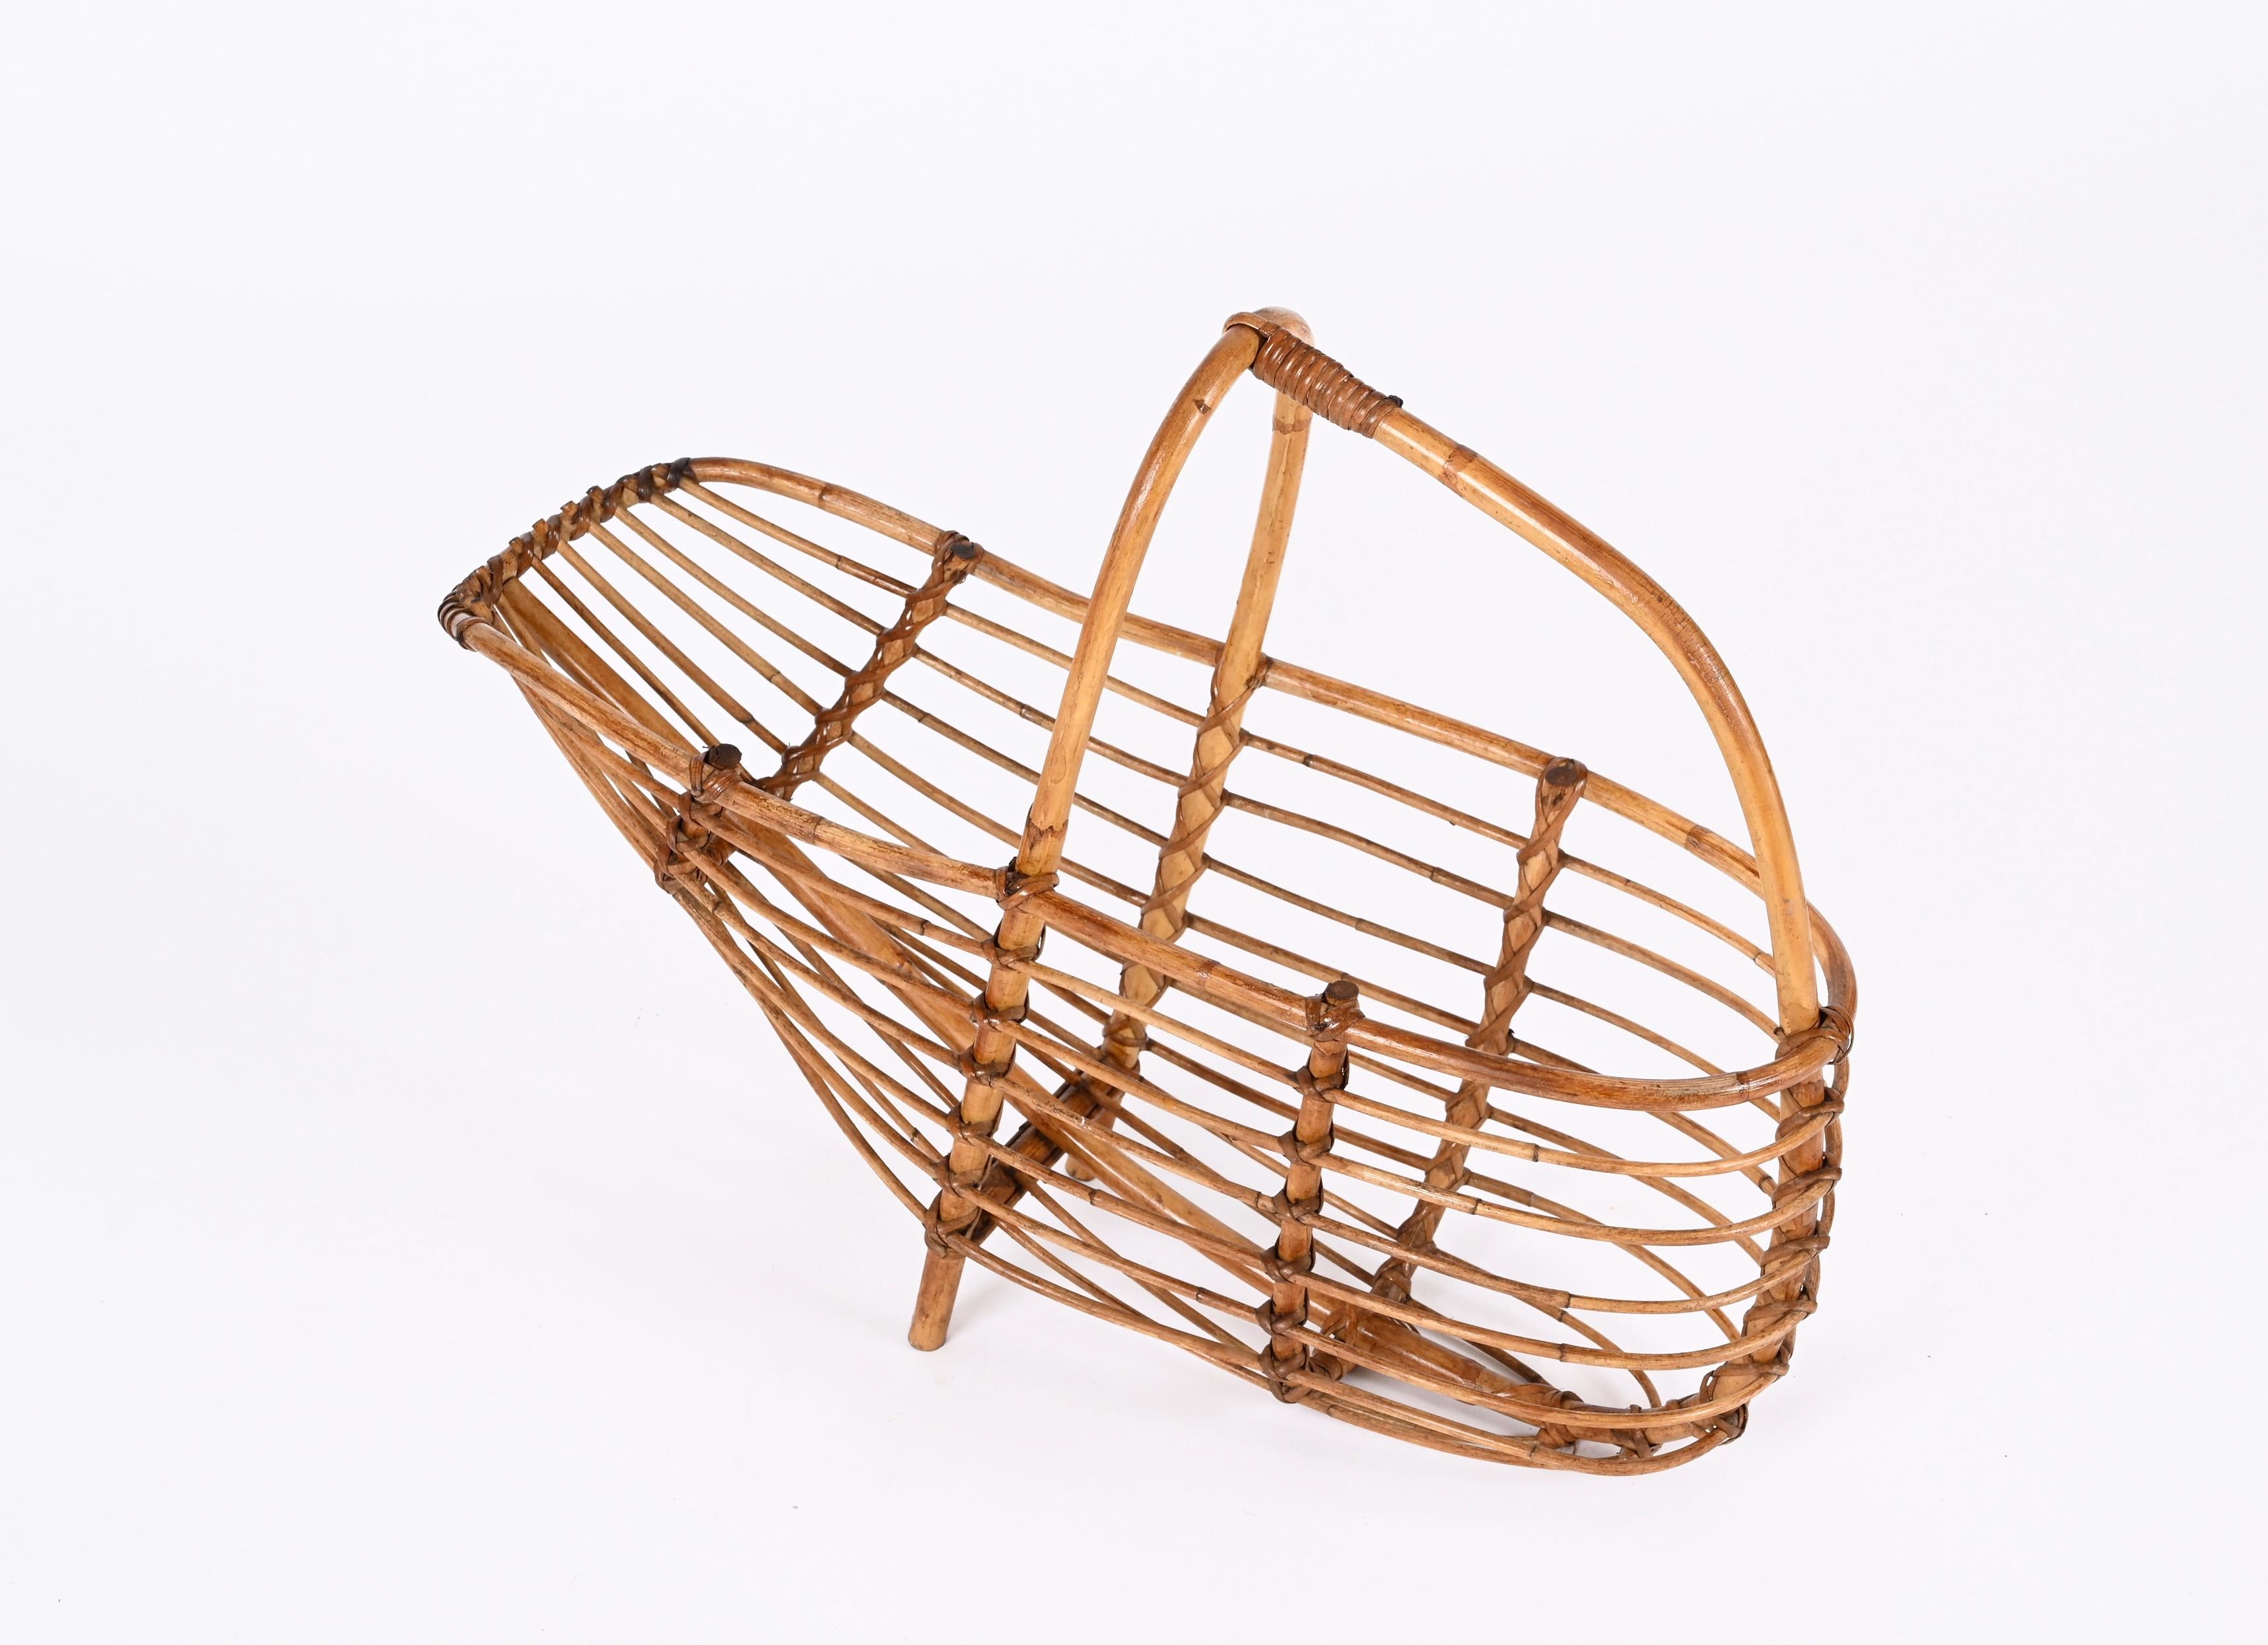 Midcentury French Riviera Bamboo and Rattan Italian Magazine Rack, 1960s For Sale 6